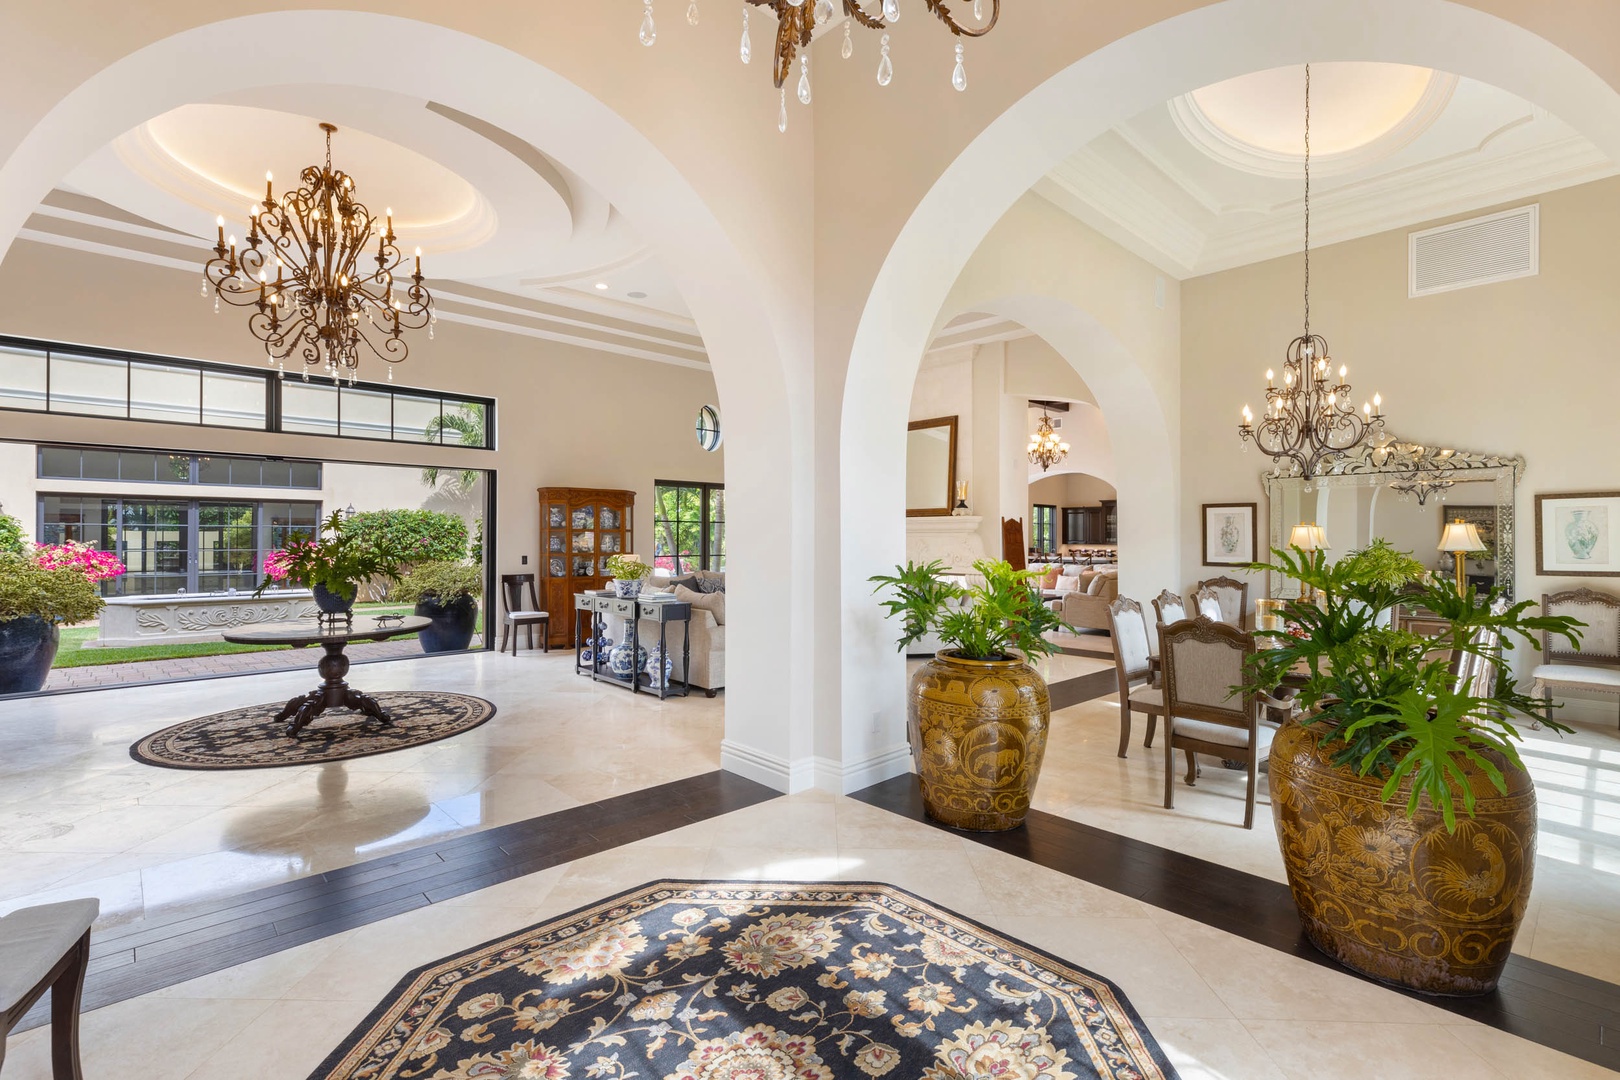 Honolulu Vacation Rentals, Royal Kahala Estate - Open floorplan for seamless connection, a perfect place to gather with loved ones.